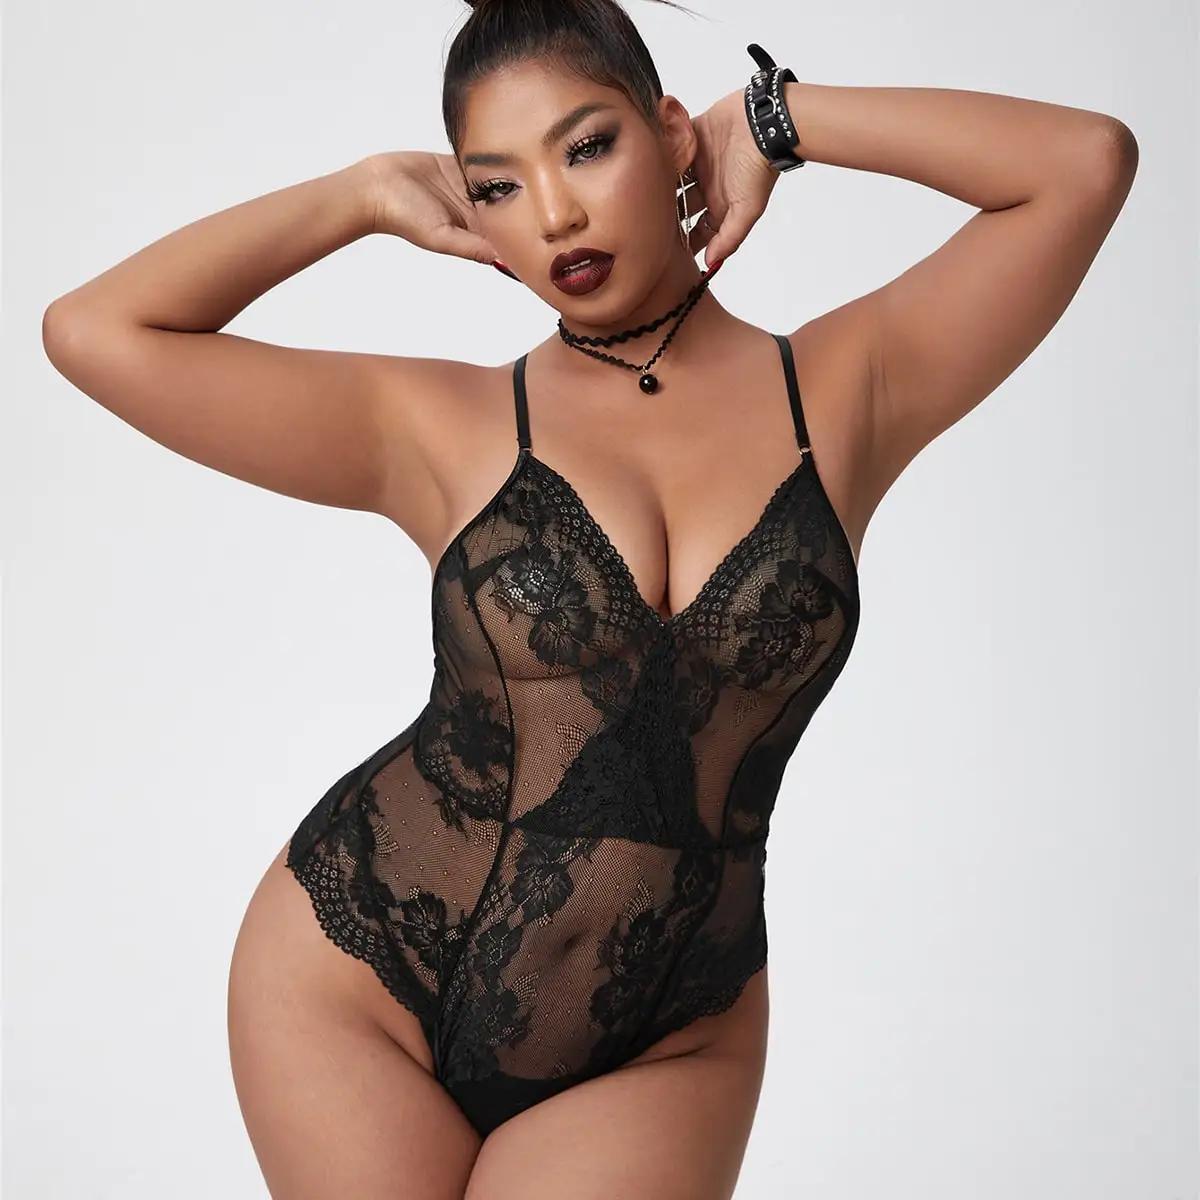 Baby Hot - Women Porn Taste Lingerie Hot Erotic Baby Dolls Dress Teddy Lenceria  Interest Mujer Babydoll Underwear Sentiment Costumes Plus - Buy Women Lace  Overalls For Women Transparent Body Women Clothes Female Backless Sexy